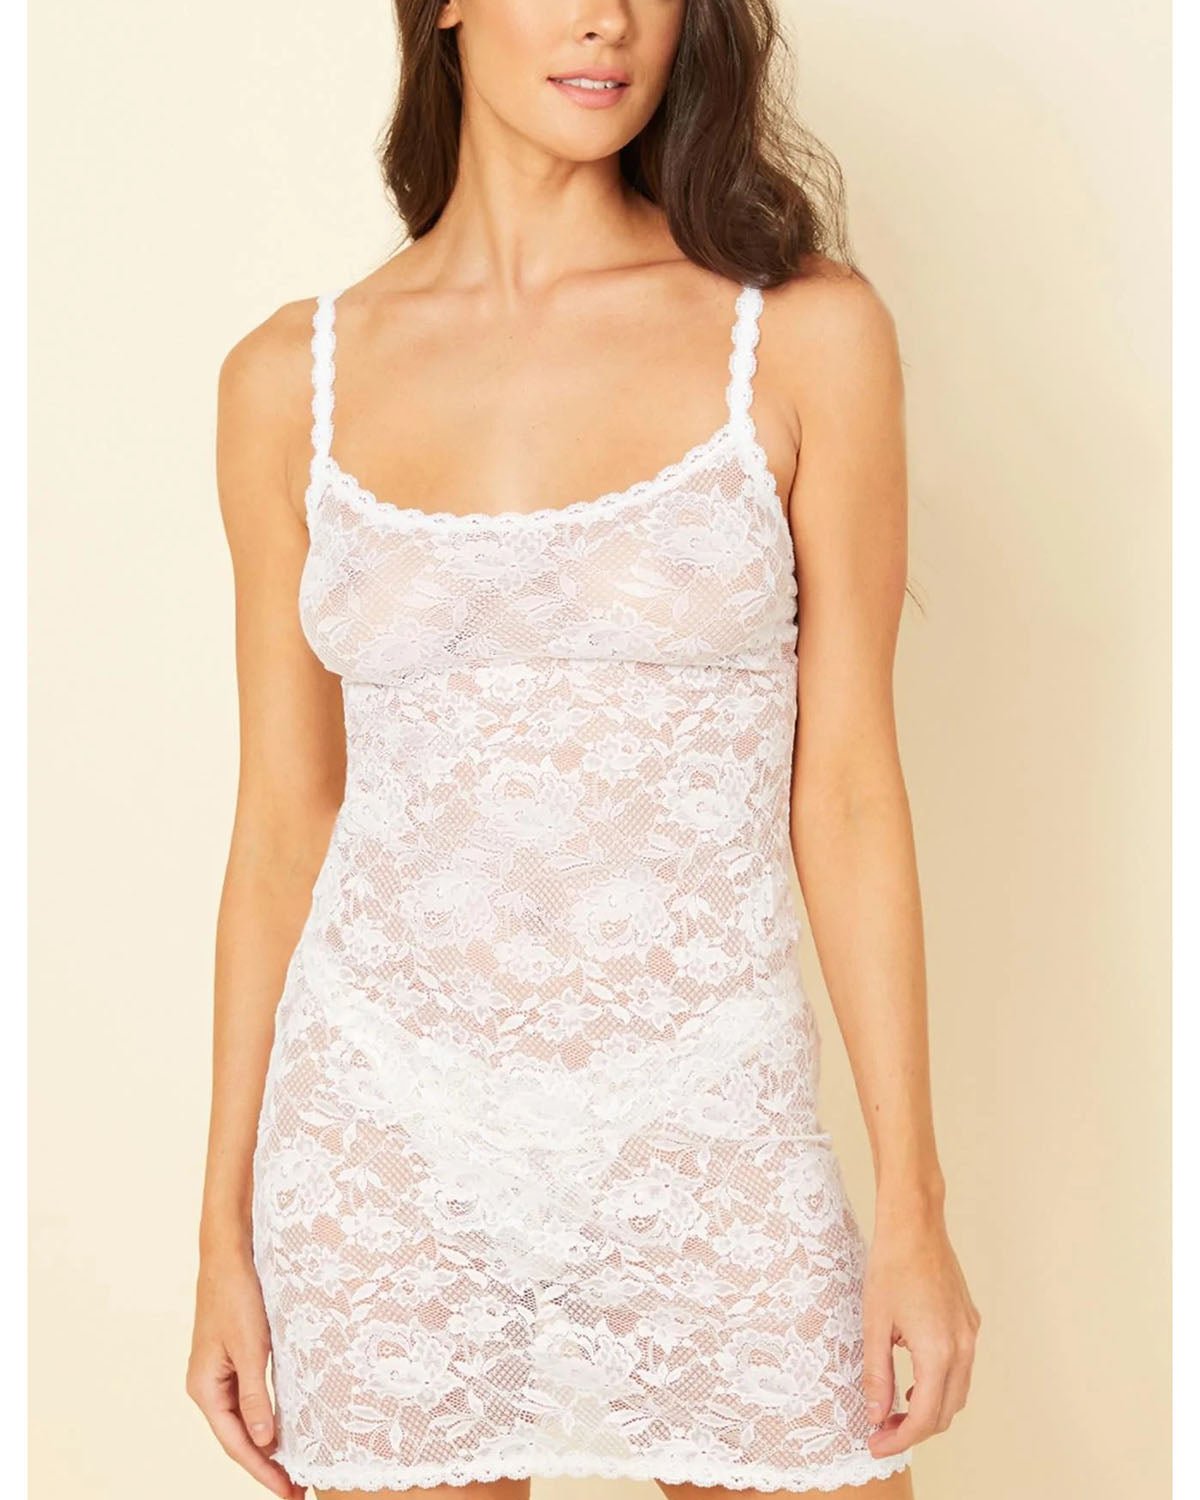 Cosabella Never Say Never Foxie Chemise